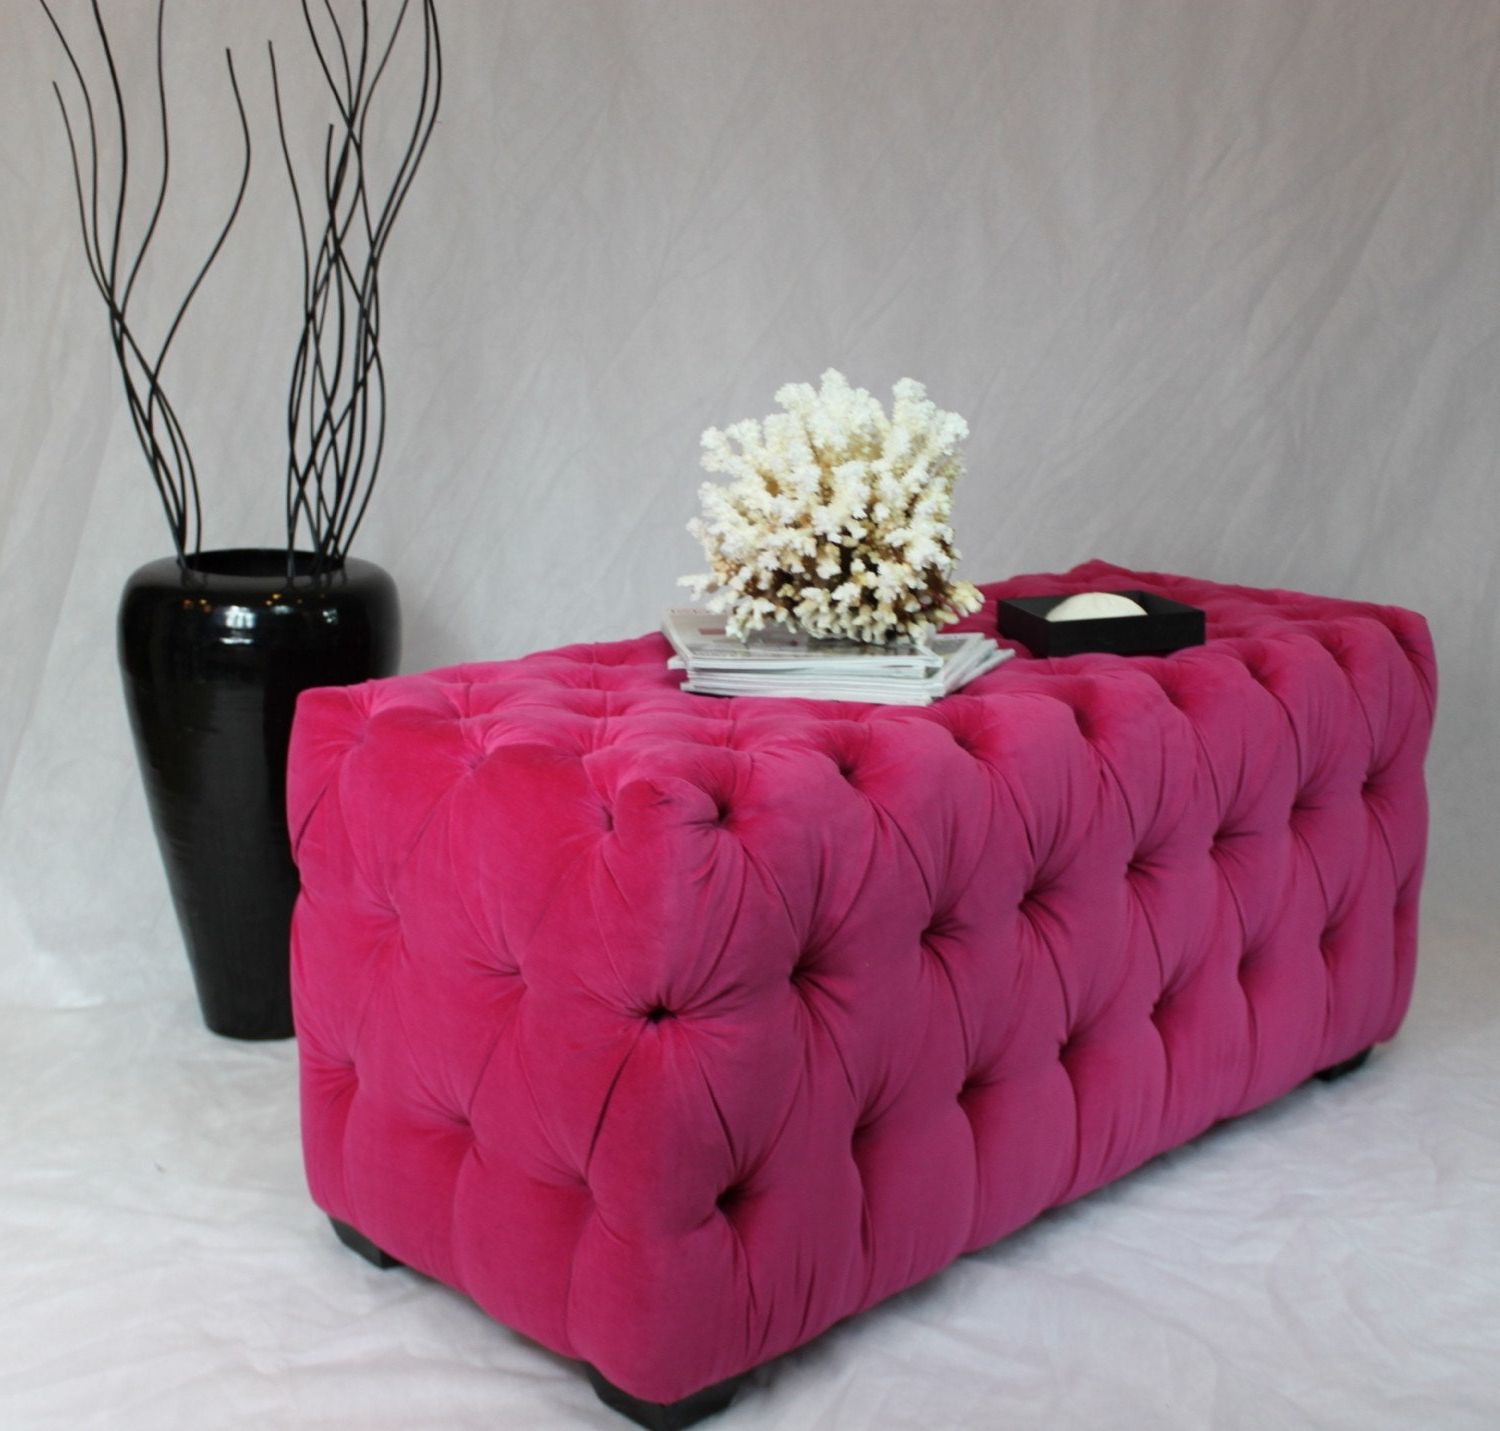 Sold Can Replicate Large Fuchsia Tufted Ottoman With Black Regarding Newest Pink Champagne Tufted Fabric Ottomans (View 4 of 10)